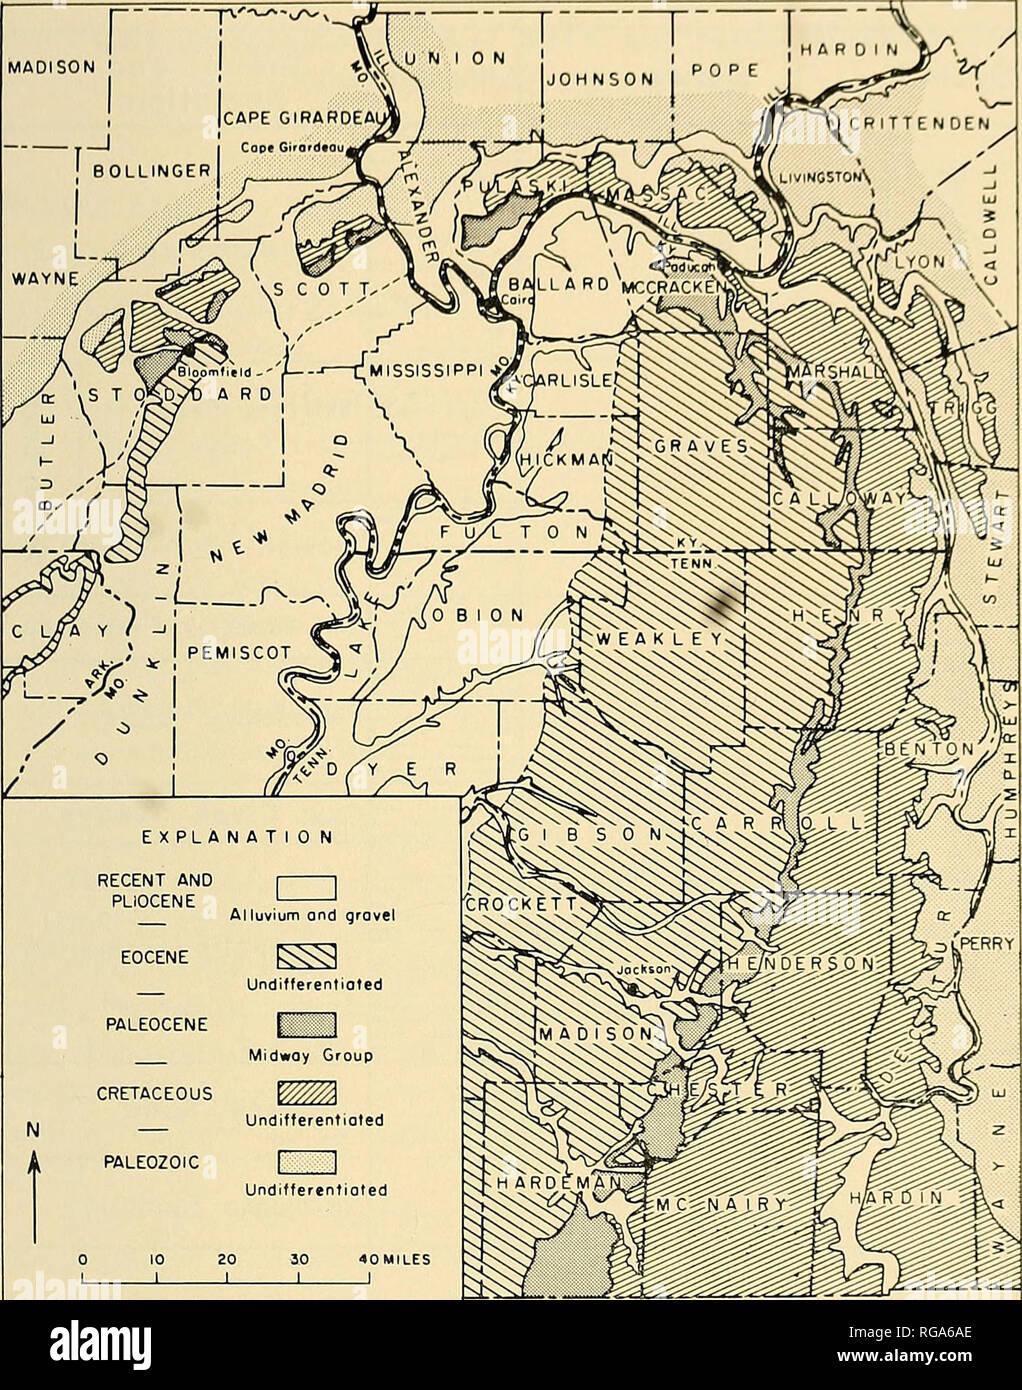 . Bulletins of American paleontology. Paleocene Forams Kentucky: Browne and Herrick 249. MADISON &gt; PALEOCENE j  Midwoy Group CRETACEOUS N PALEOZOIC 10 20 30 40MILES  l I I Figure I.— Map of the upper part of the Mississippi Embayment showing the outcrops of Eocene and Paleocene (modified from Cooper, 1944). pattern of Tertiary and Cretaceous formations in the upper part of the Mississippi Embayment. The accompanying chart (Pryor and Glass, 1961, fig. 2) indicates the correlation of these formations in the same area.. Please note that these images are extracted from scanned page images that Stock Photo